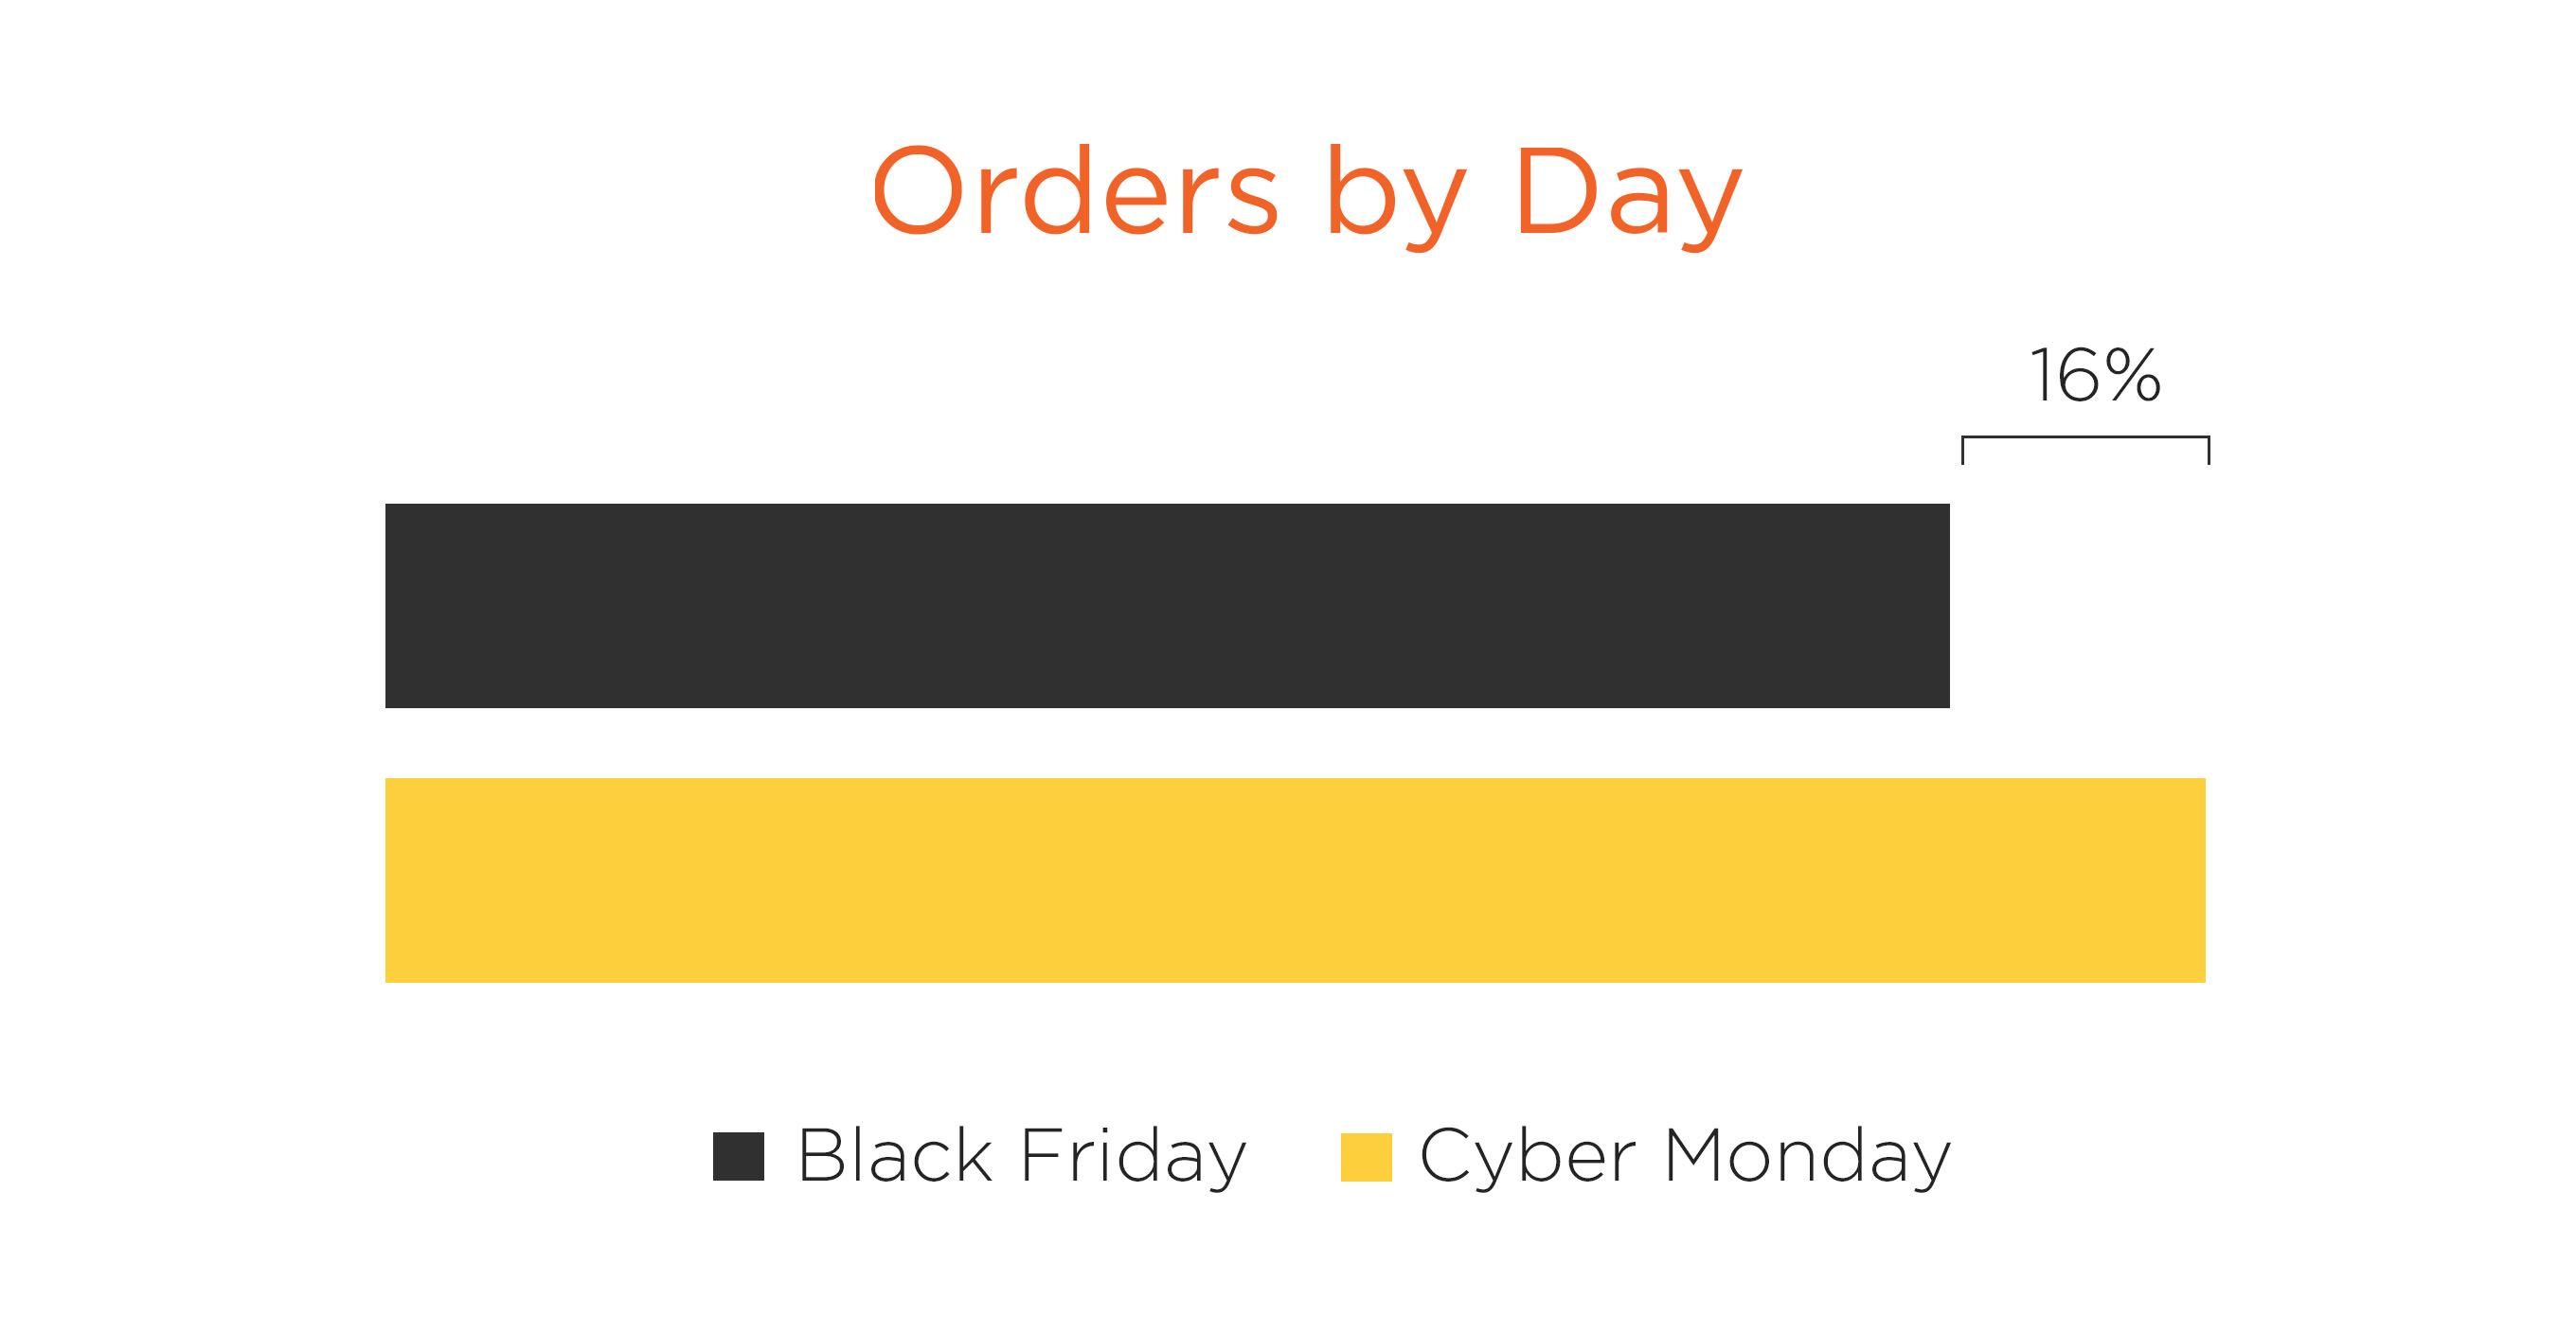 Black Friday and Cyber Monday Orders